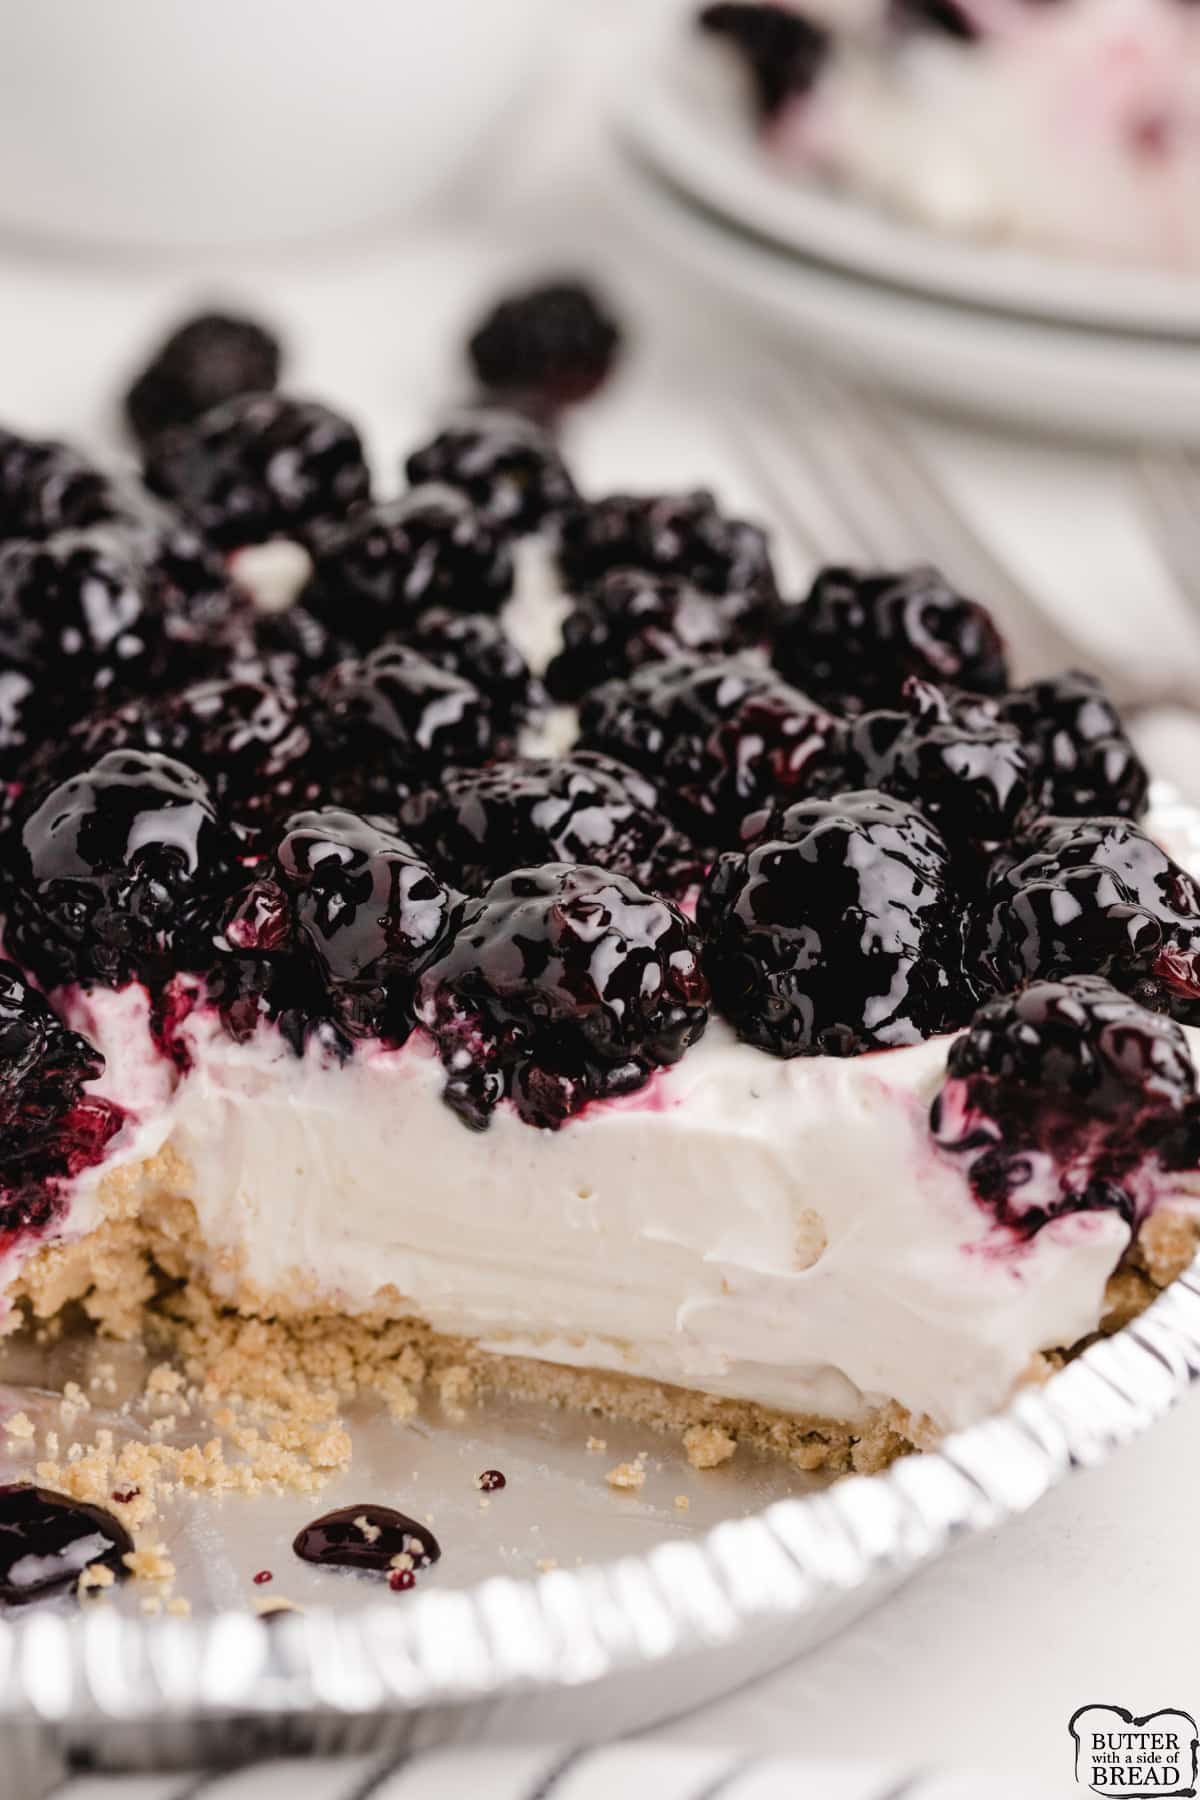 No-Bake Blackberry Cheesecake is made with a sweet cream cheese layer and fresh blackberries. Only a few ingredients needed to make this simple no-bake cheesecake recipe. 